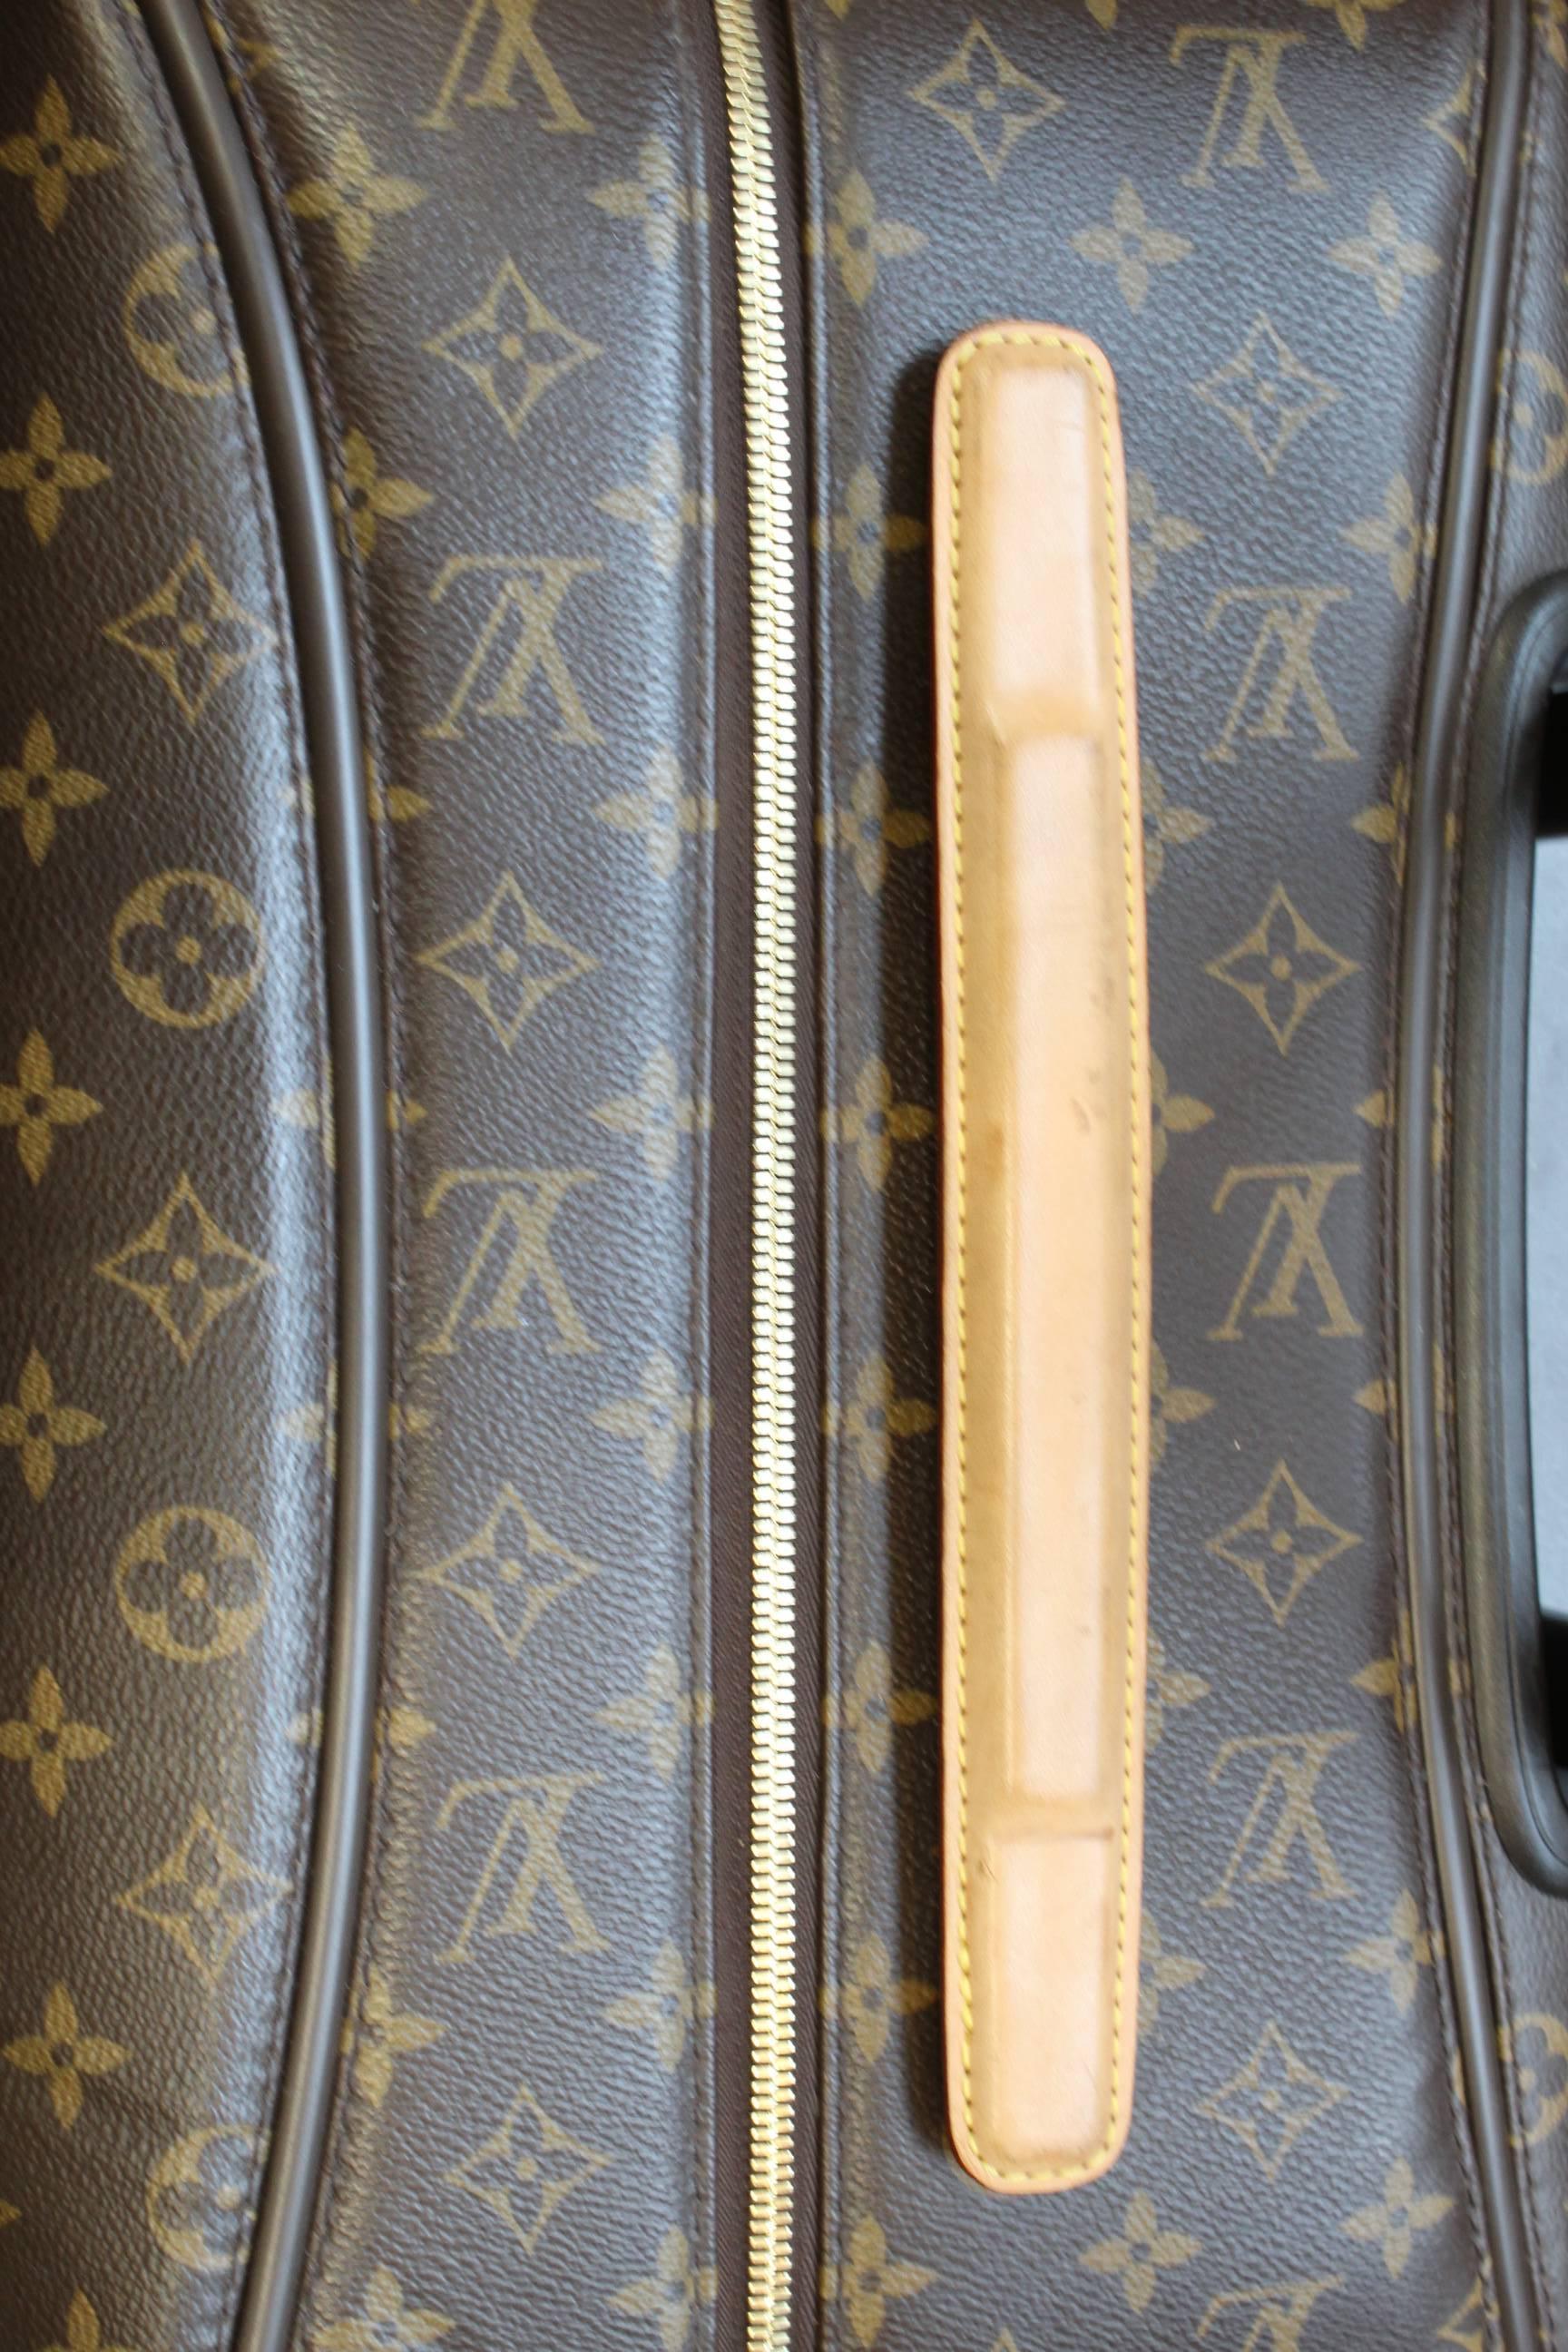 Awesoome Louis Vuitton Zephye Suitcase in monogram canvas.

Interior really clean with different comprtiments.
These size in no longer available at Vuitton

Sold wiith protective bag.

Size 28x17 inches

 